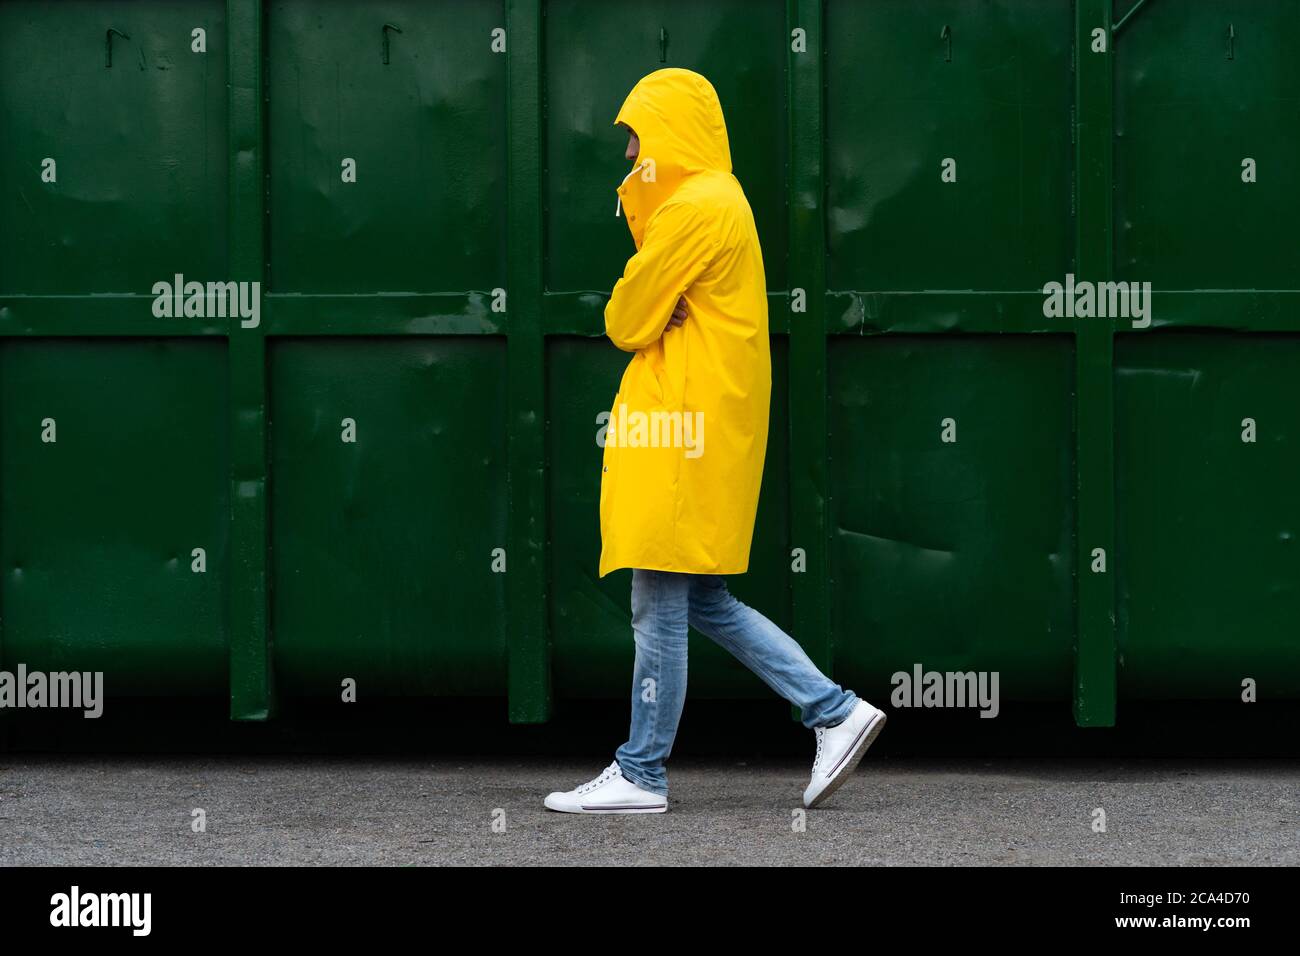 Man in a yellow raincoat walks down the street in the rain weather next to green container, side view. Outdoor. Stock Photo